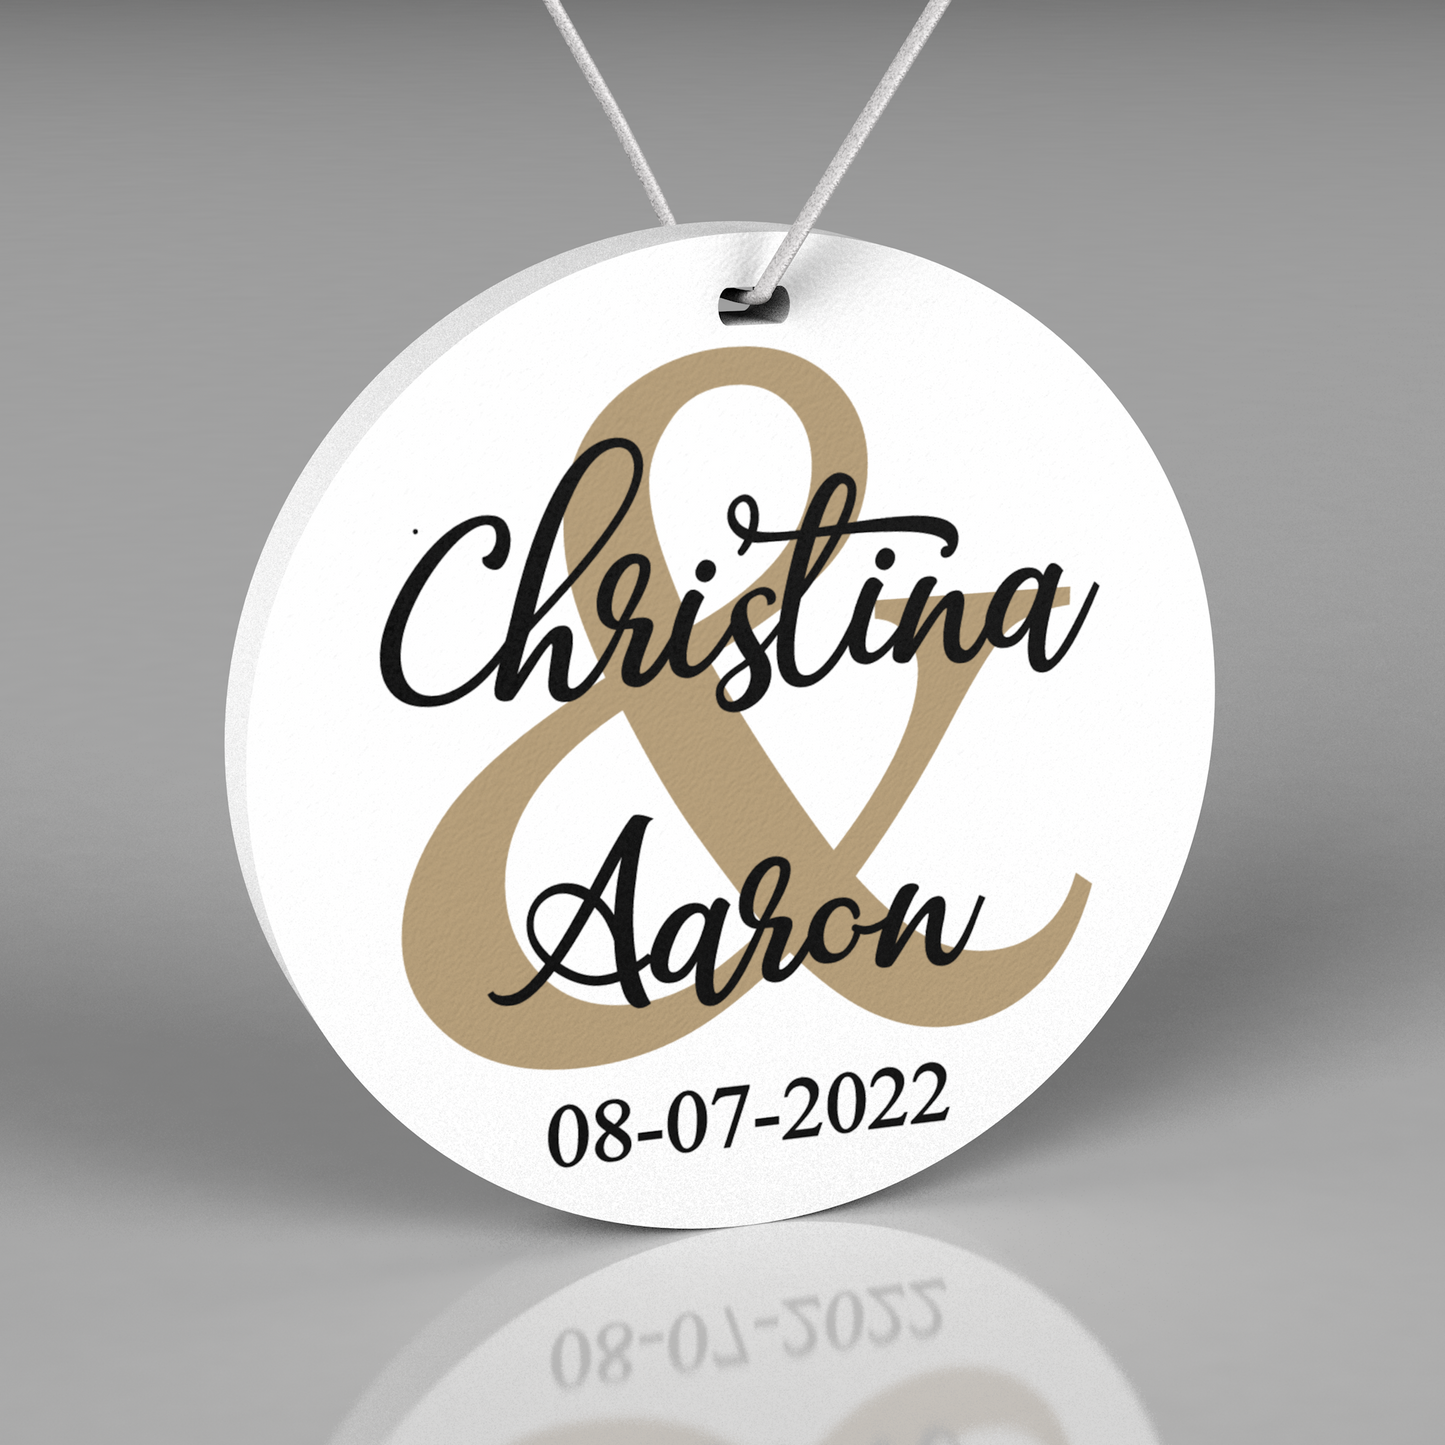 Personalized Couples Christmas Ornament. Wedding, Engagement or New Couple Gift with Gift Box